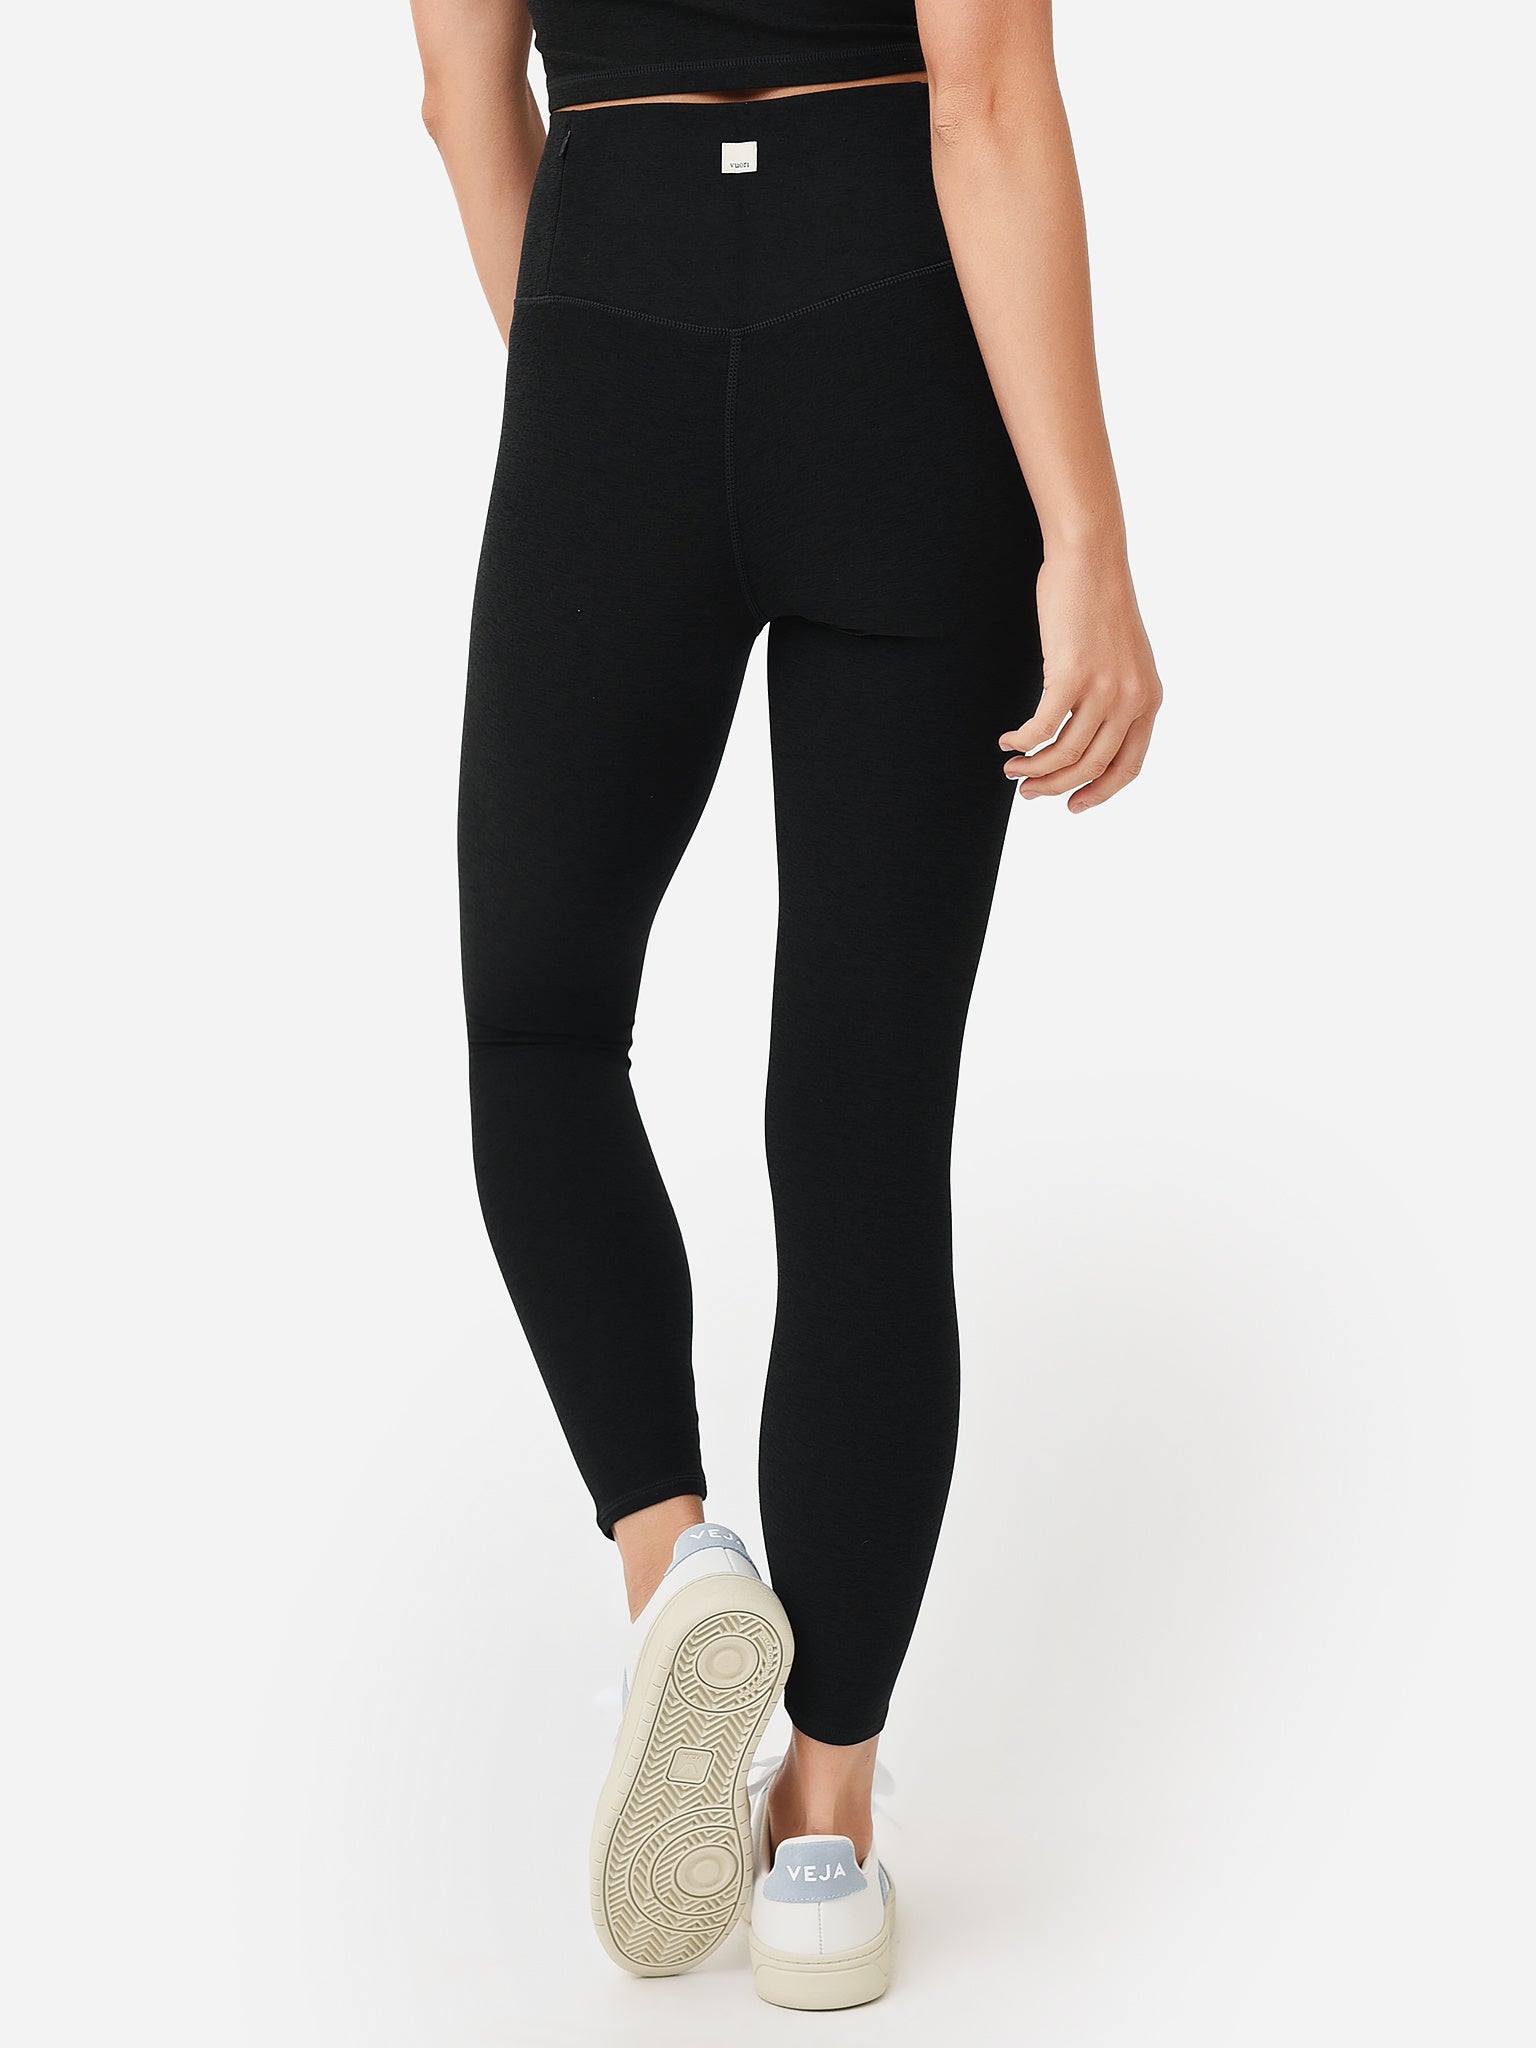 The North Face Elevation Crop Legging - Women's